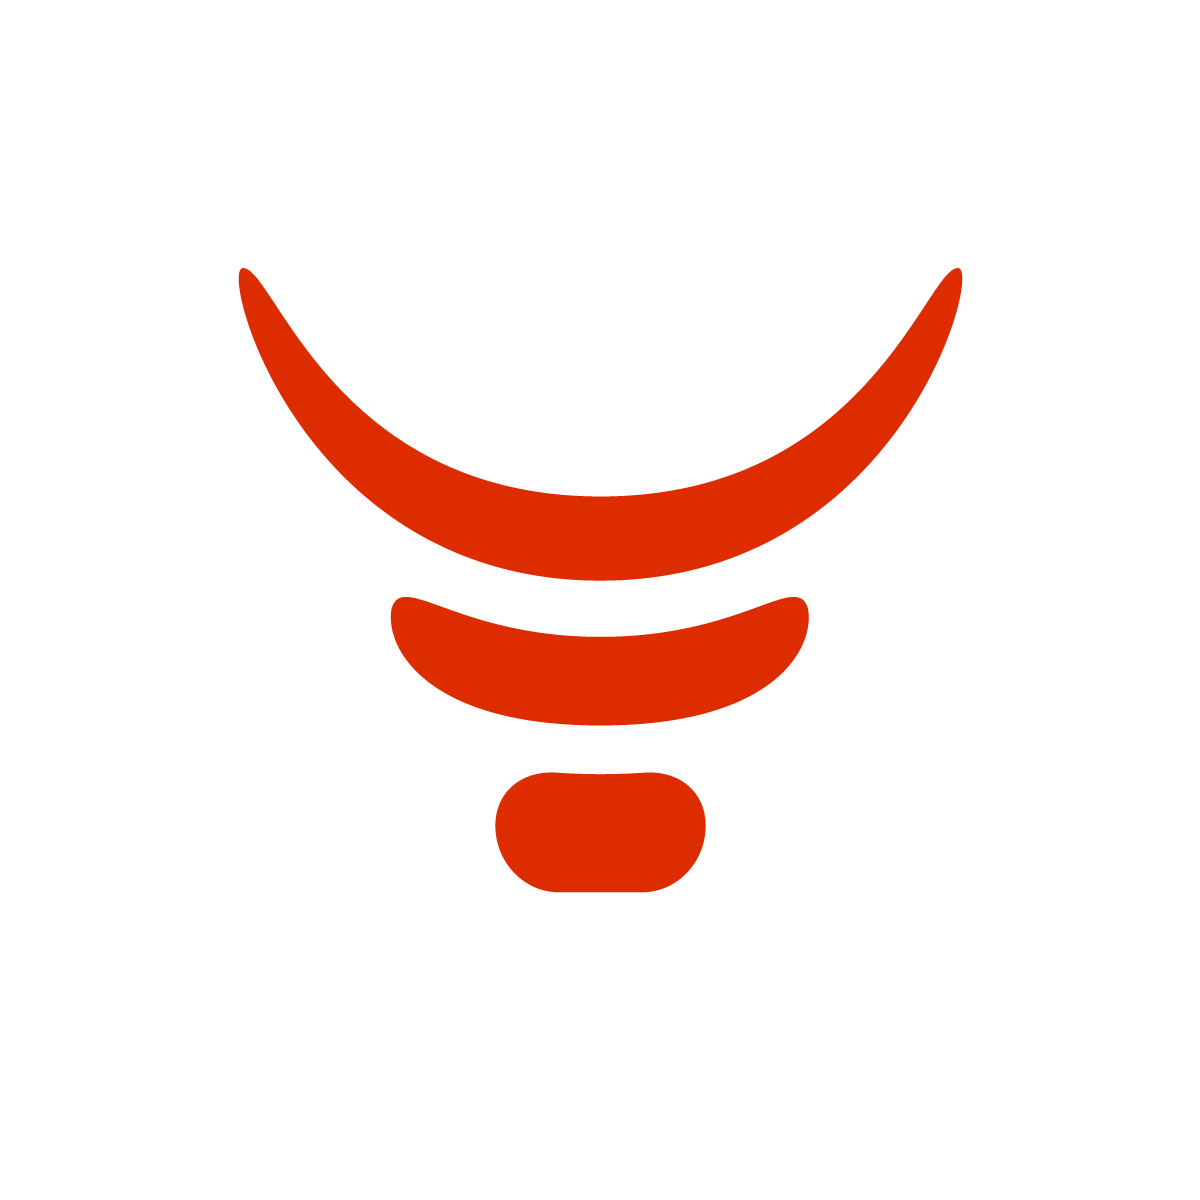 Abstract Bull Logo: A strong and dynamic logo resembling the head of a bull, made from three simple shapes